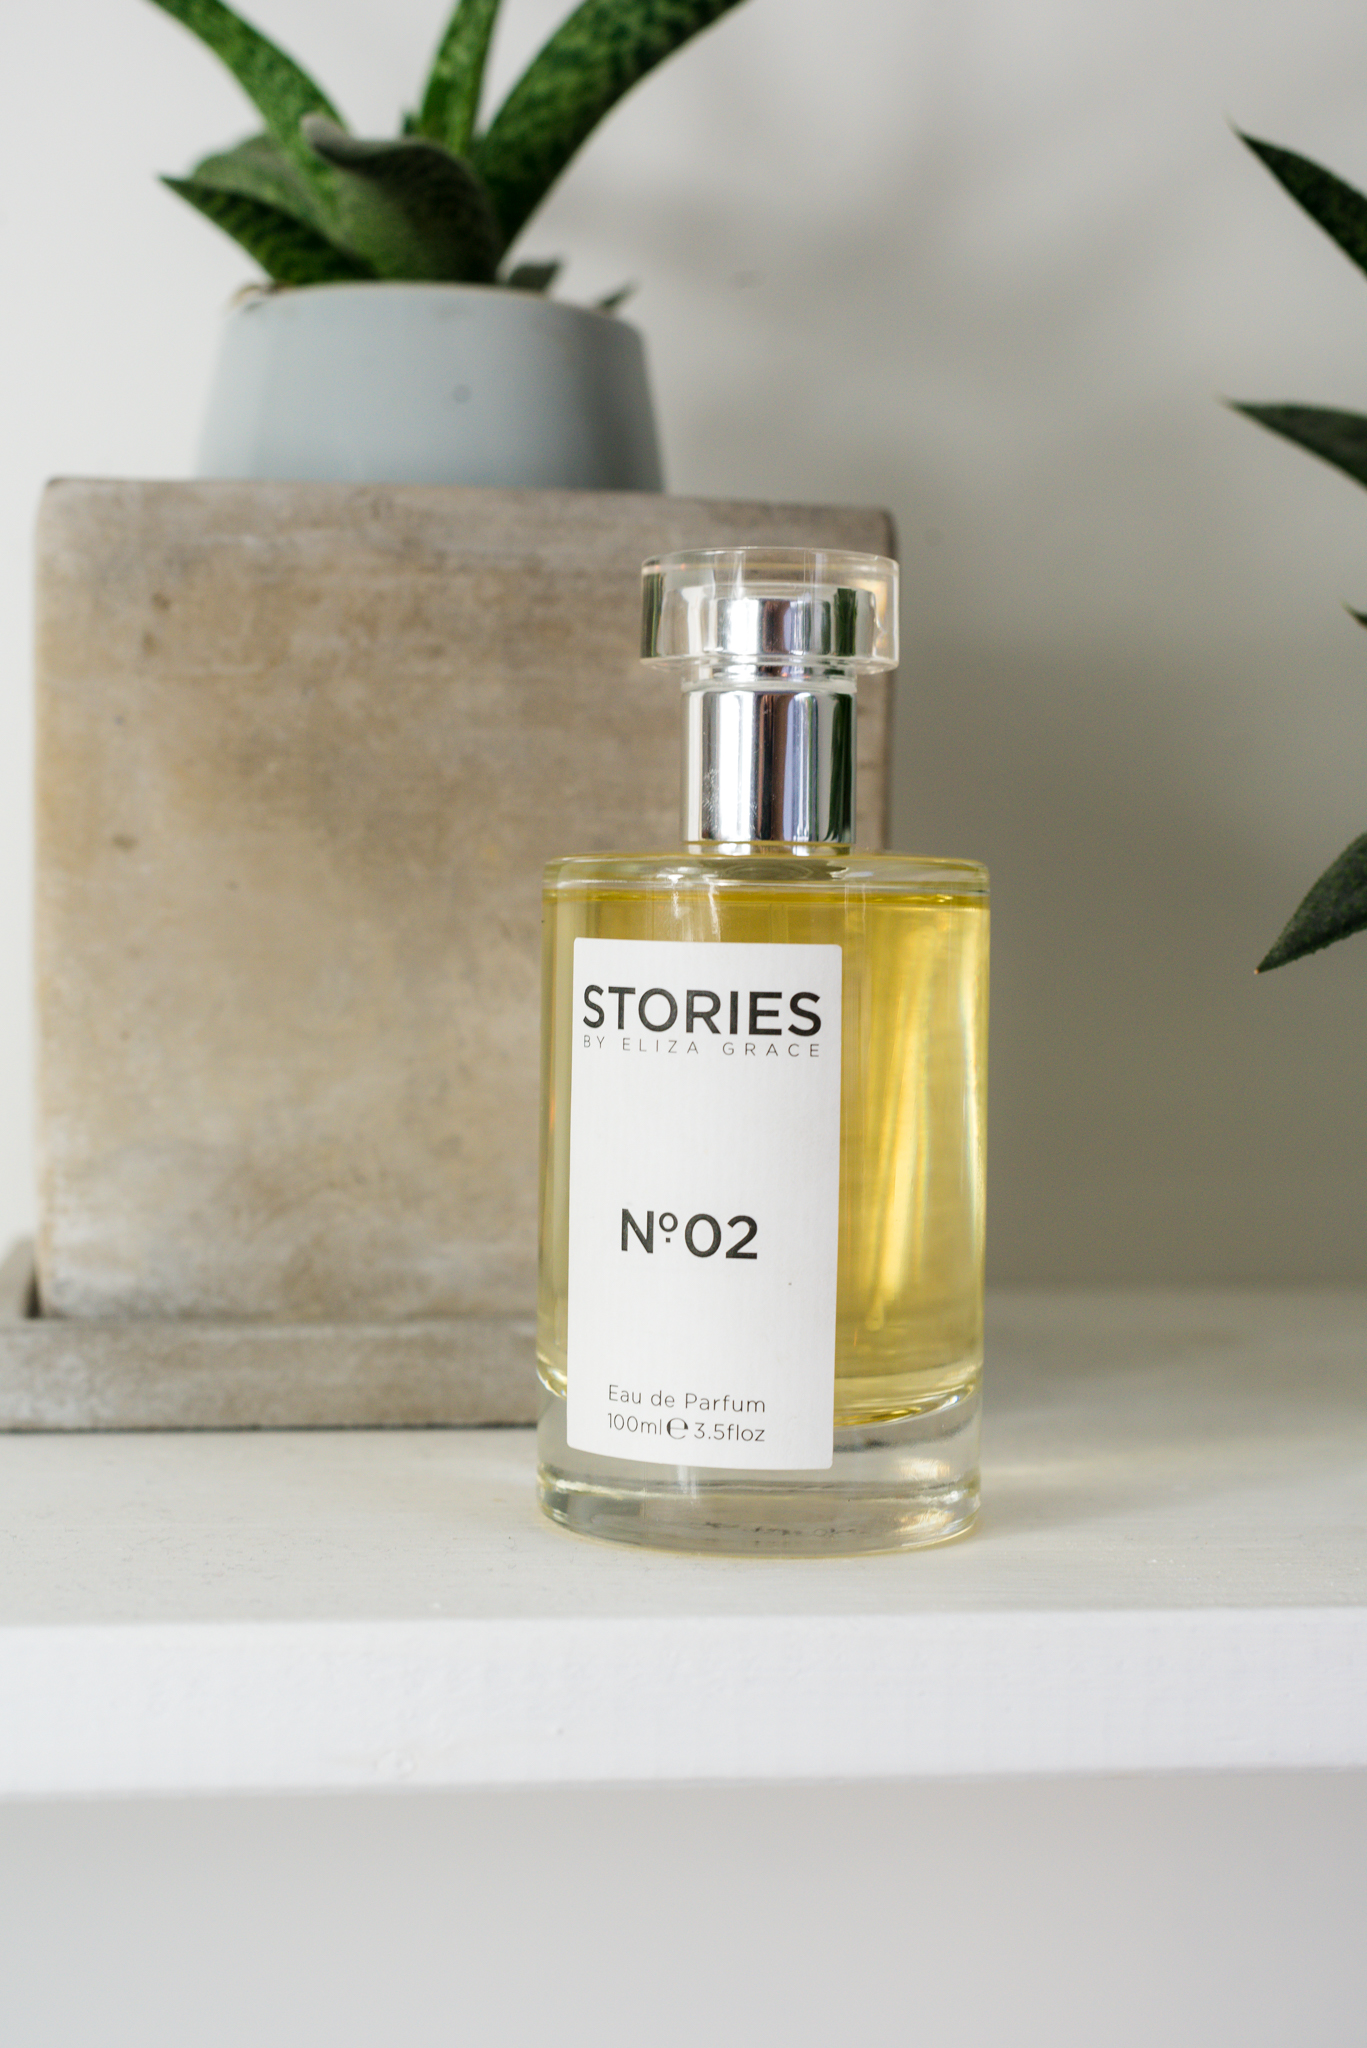 Stories by Eliza Grace perfume Collette Creative Photography Belfast Northern Ireland